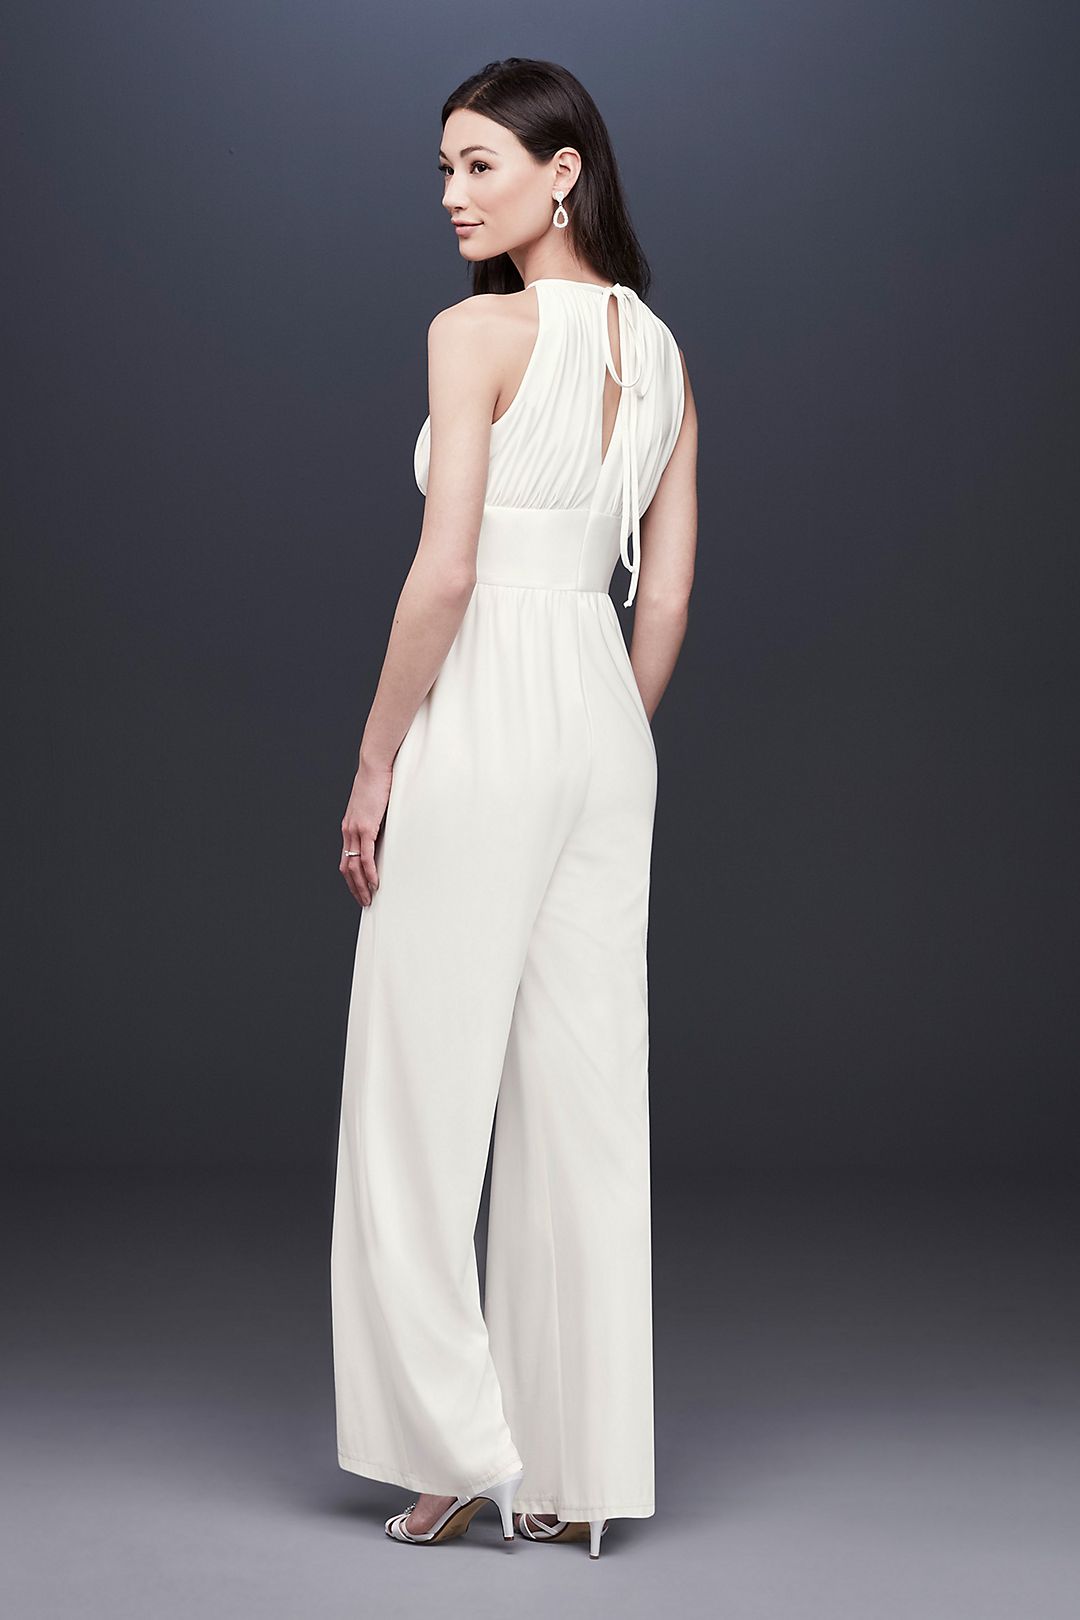 Beaded Jersey Halter Wedding Jumpsuit with Keyhole Image 2